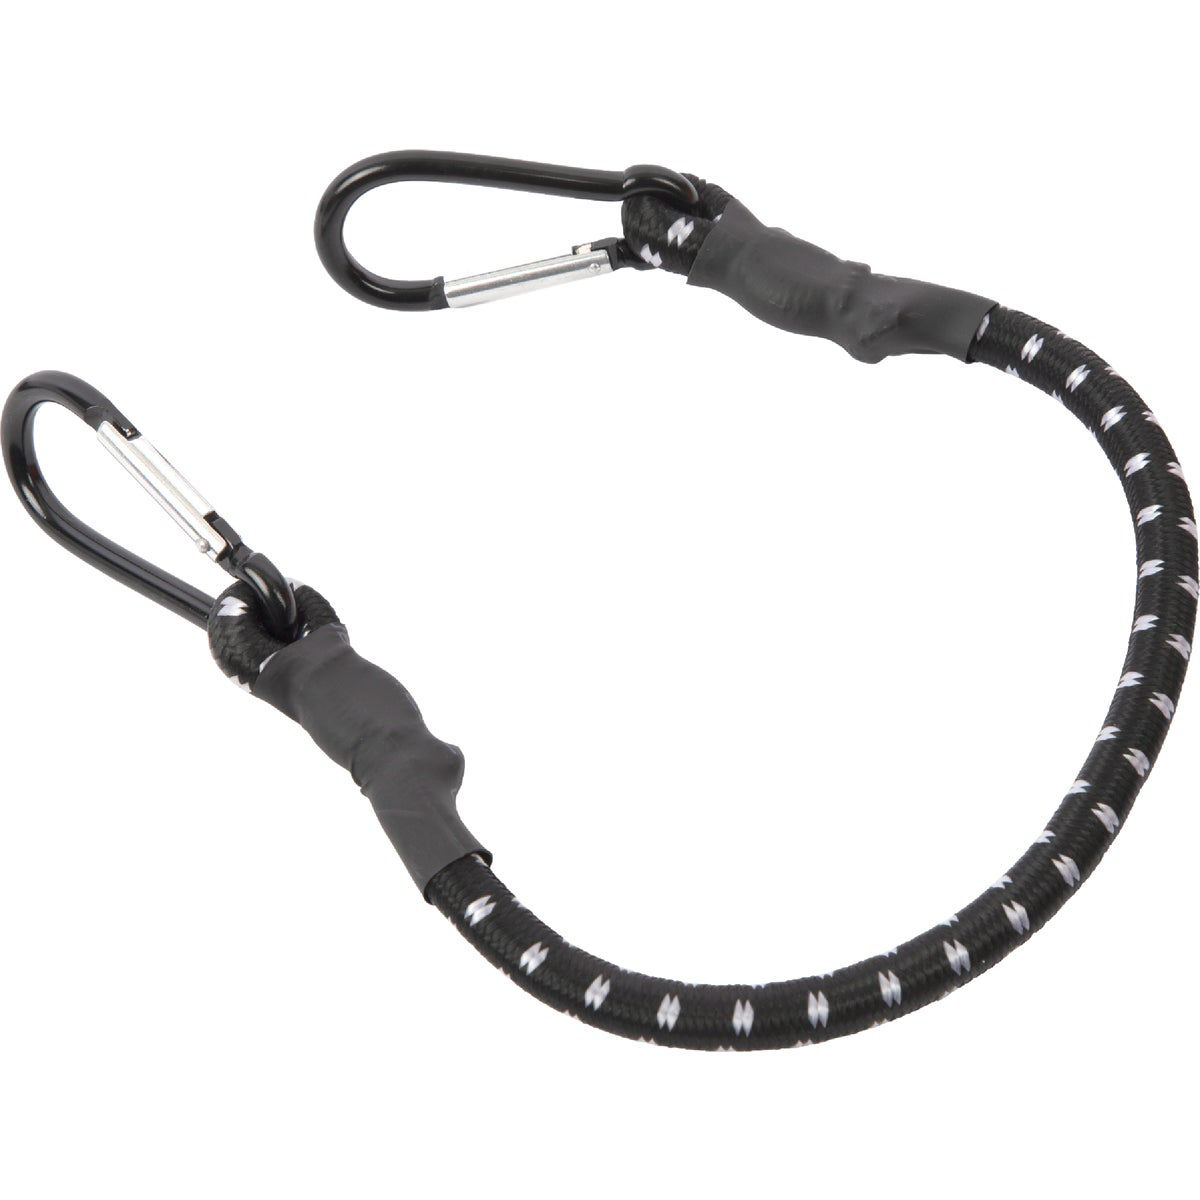 Erickson 1 In. x 24 In. Industrial Bungee Cord with Carabiner Hooks, Black  - Thomas Do-it Center